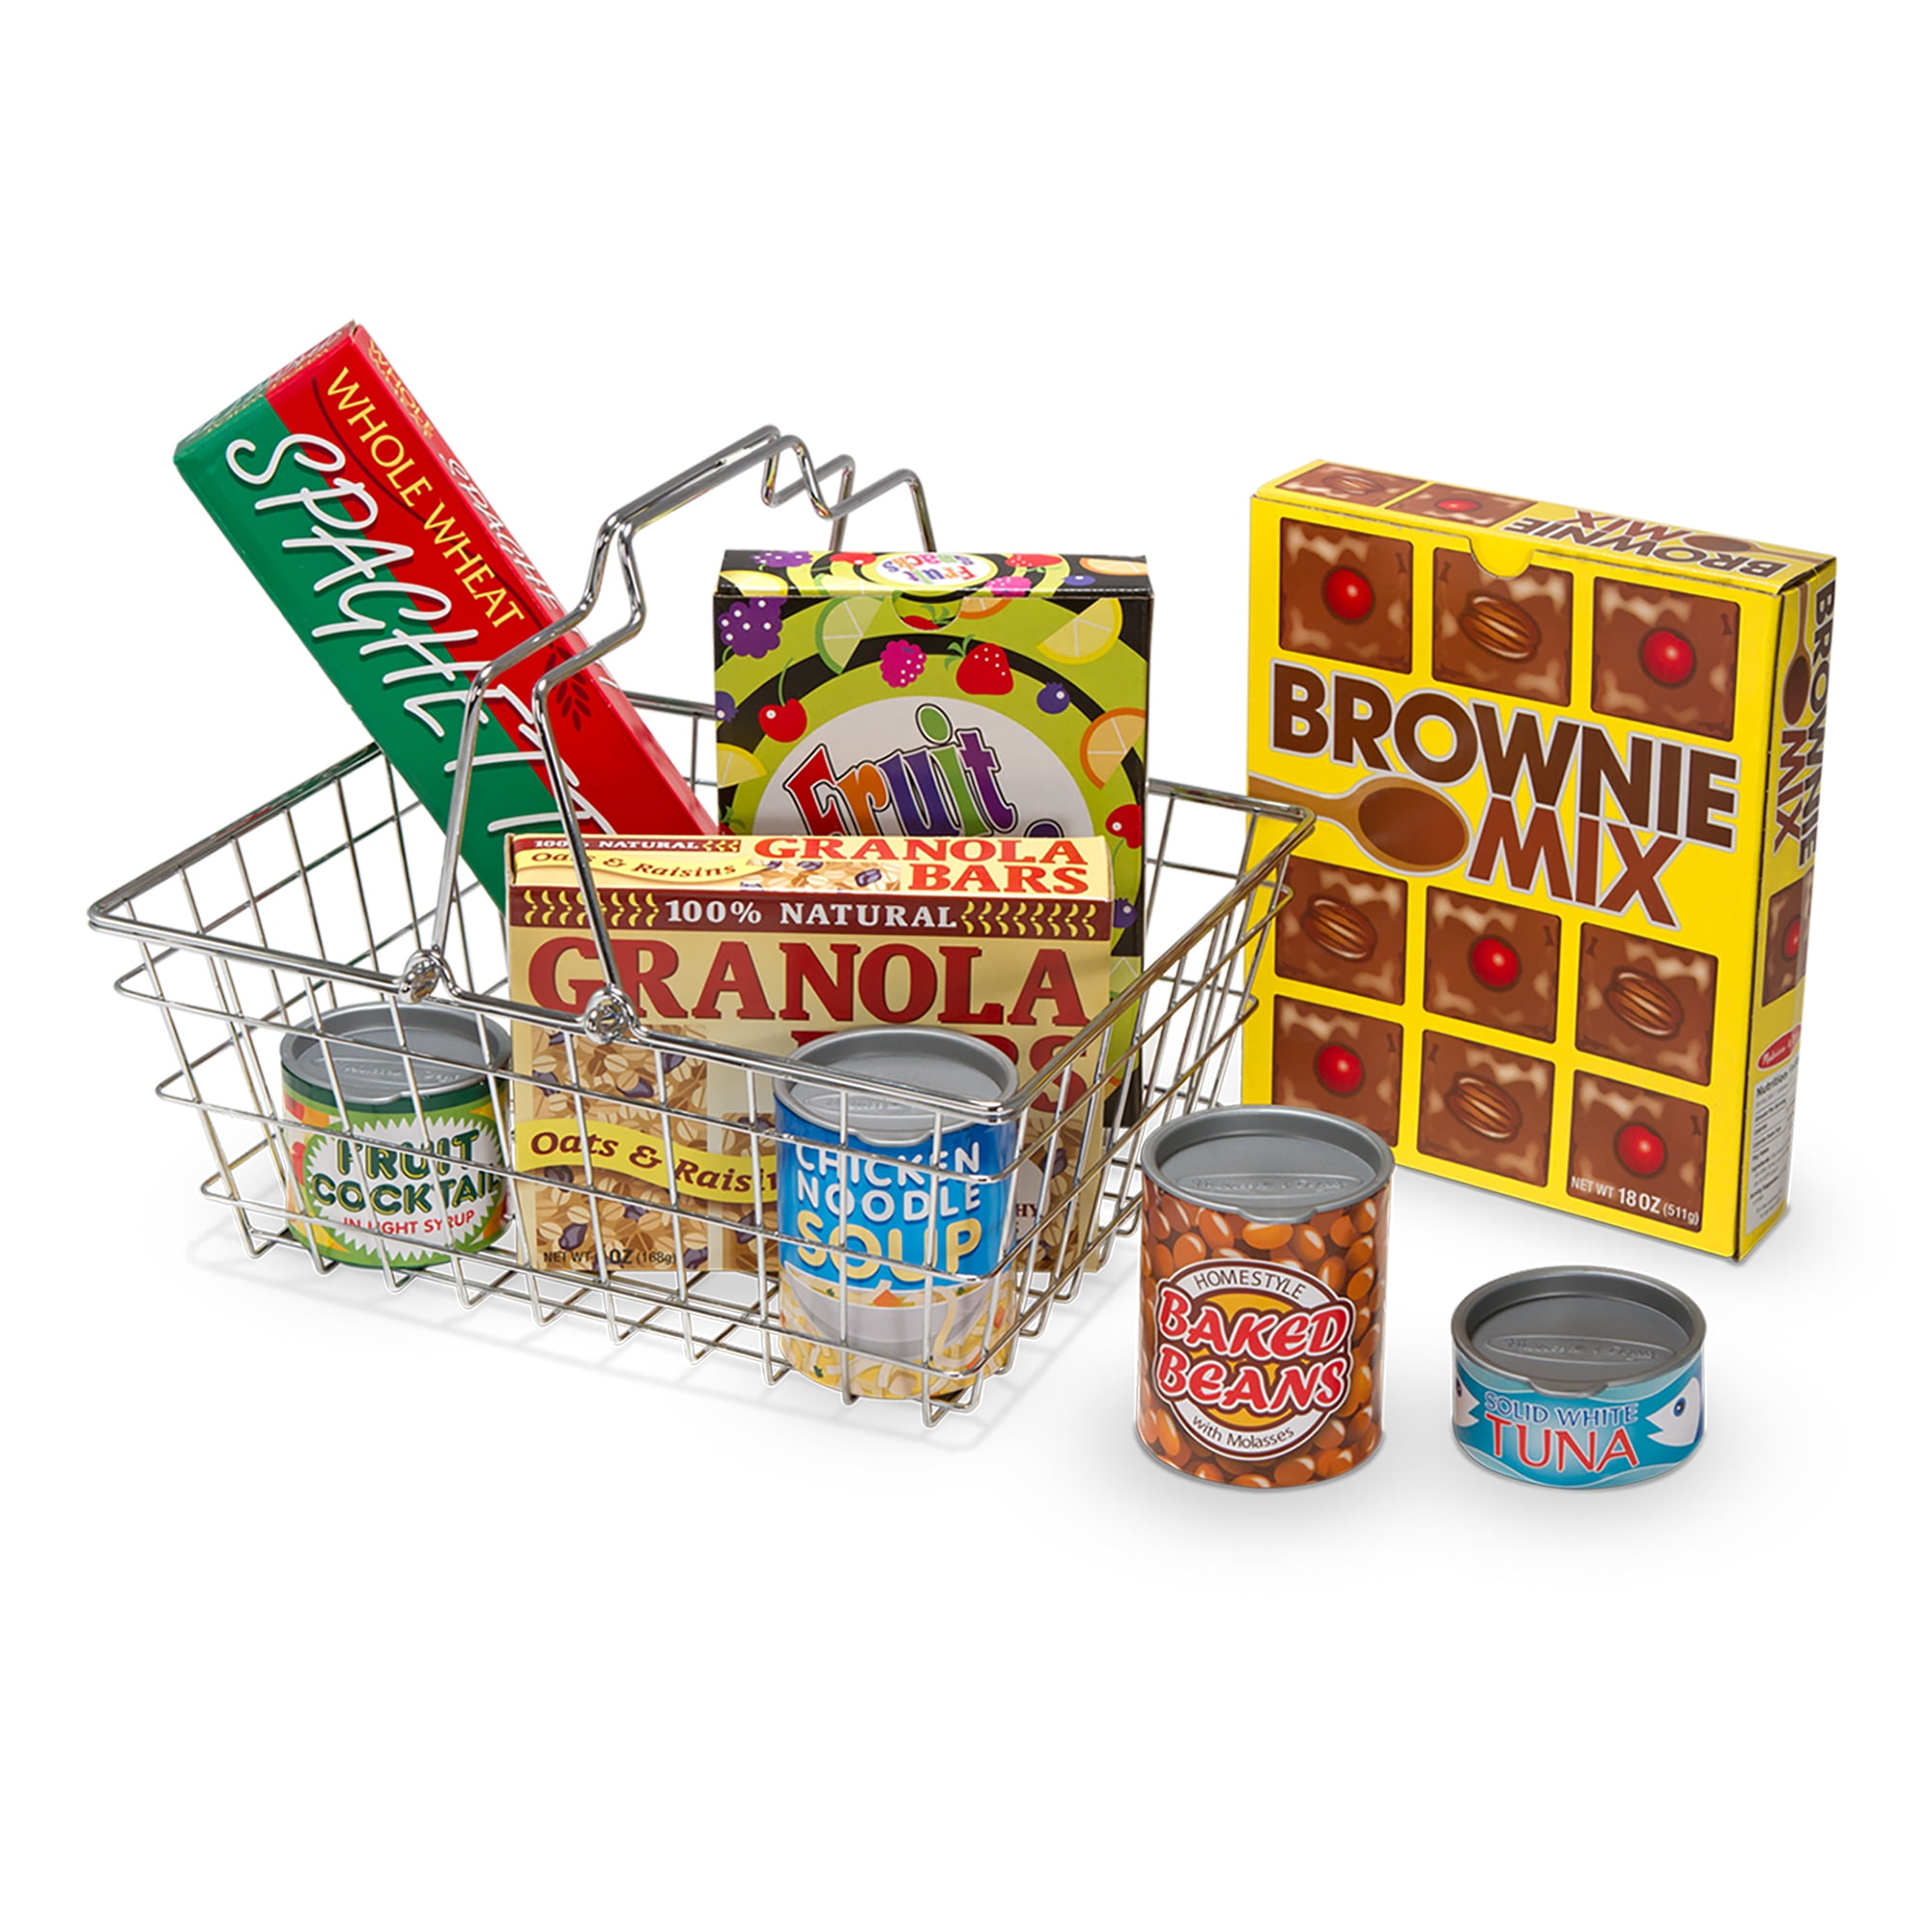 Melissa & Doug Let's Play House Grocery Cans 4088 for sale online 